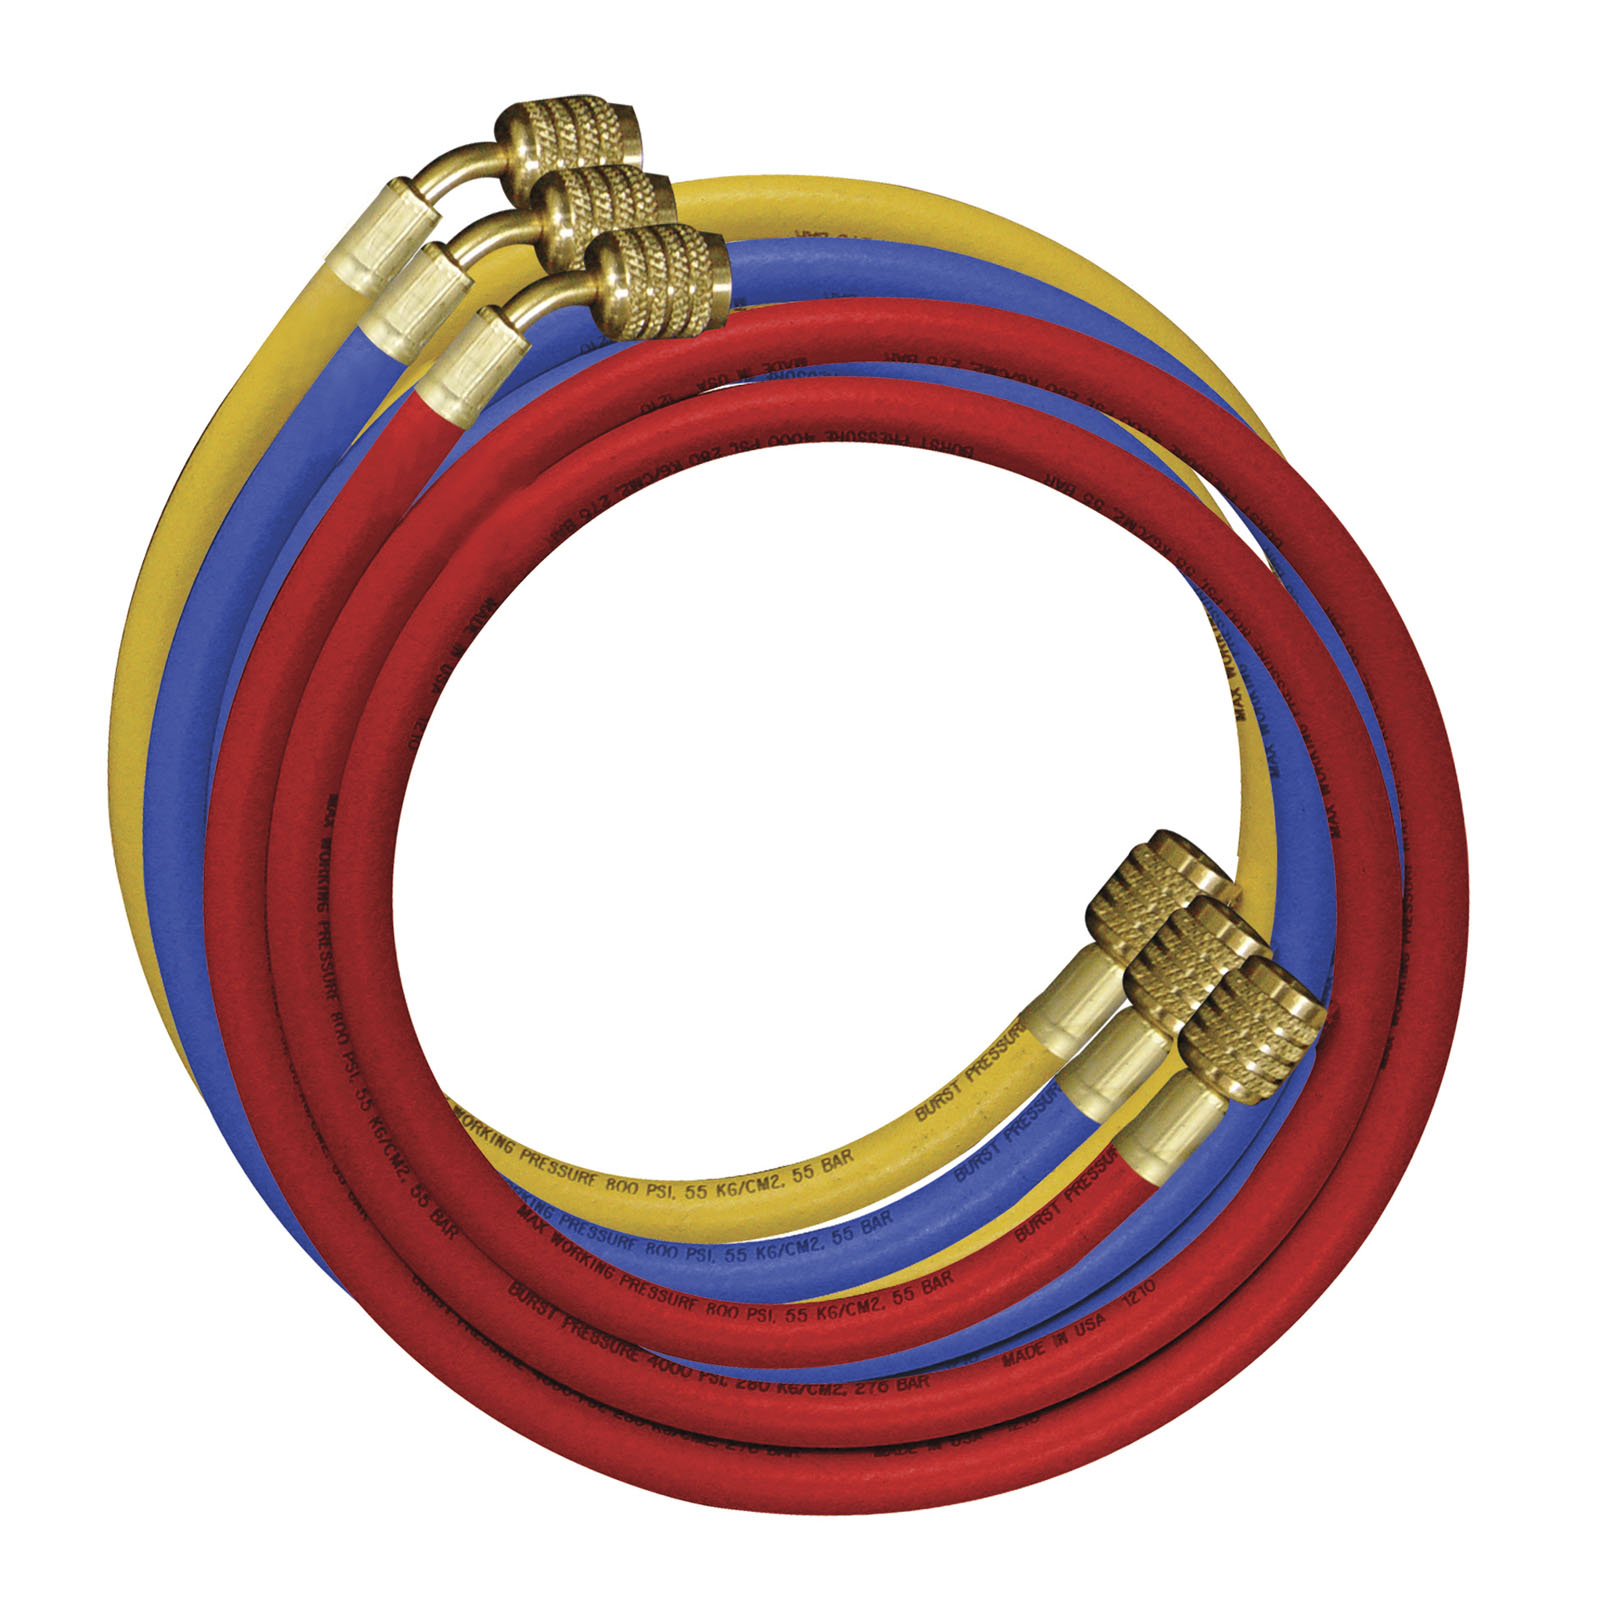 3pcs LIYYOO Air Conditioning Refrigerant Charging Hoses with Diagnostic Manifold Gauge Set for R410A R22 R404 Refrigerant Charging,1/4 Thread Hose Set 60 Red/Yellow/Blue with 2 Quick Coupler 